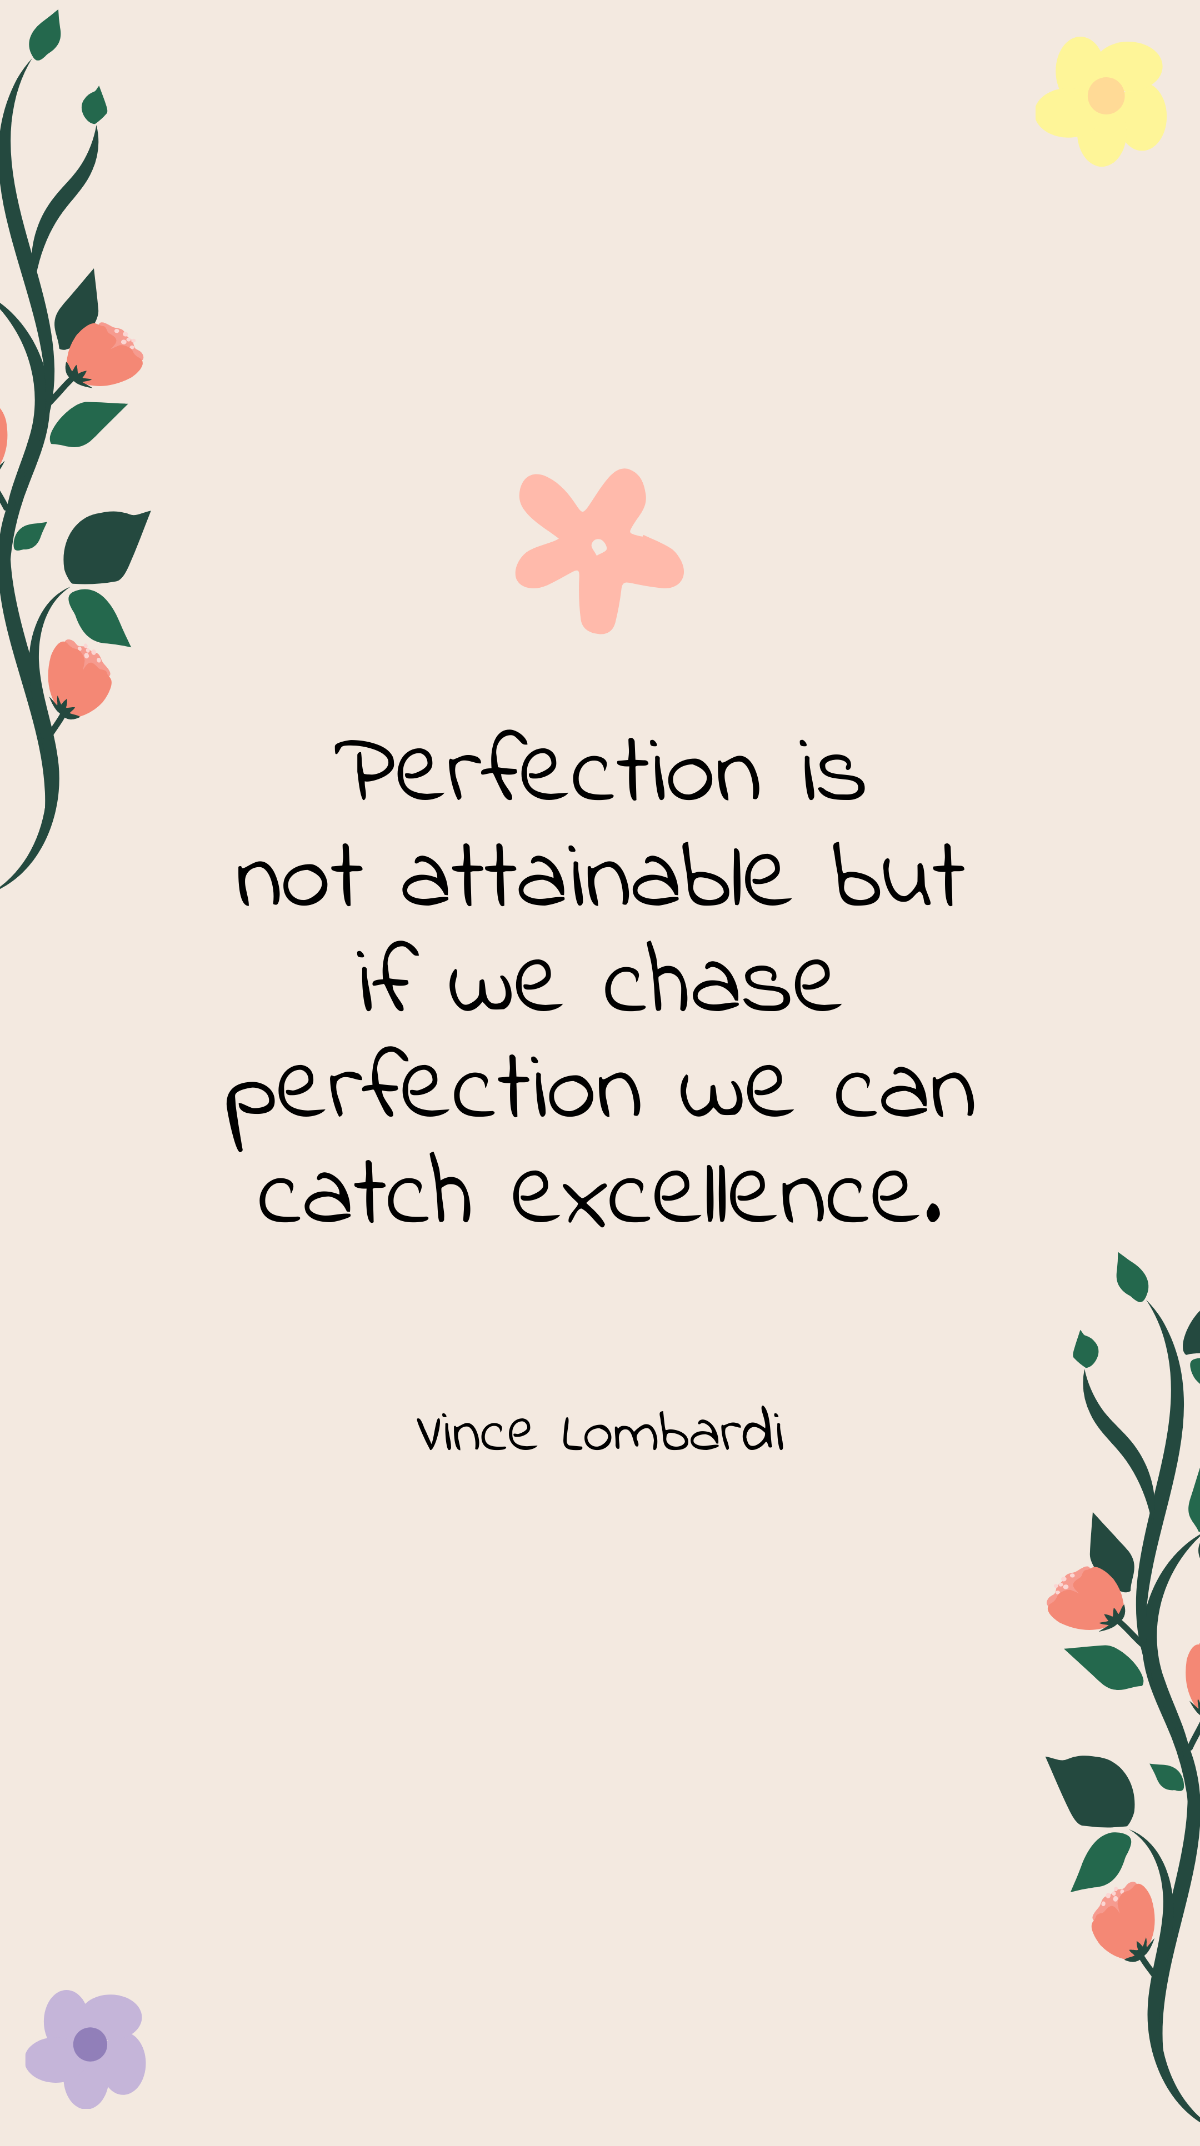 Vince Lombardi - Perfection is not attainable but if we chase perfection we can catch excellence. Template